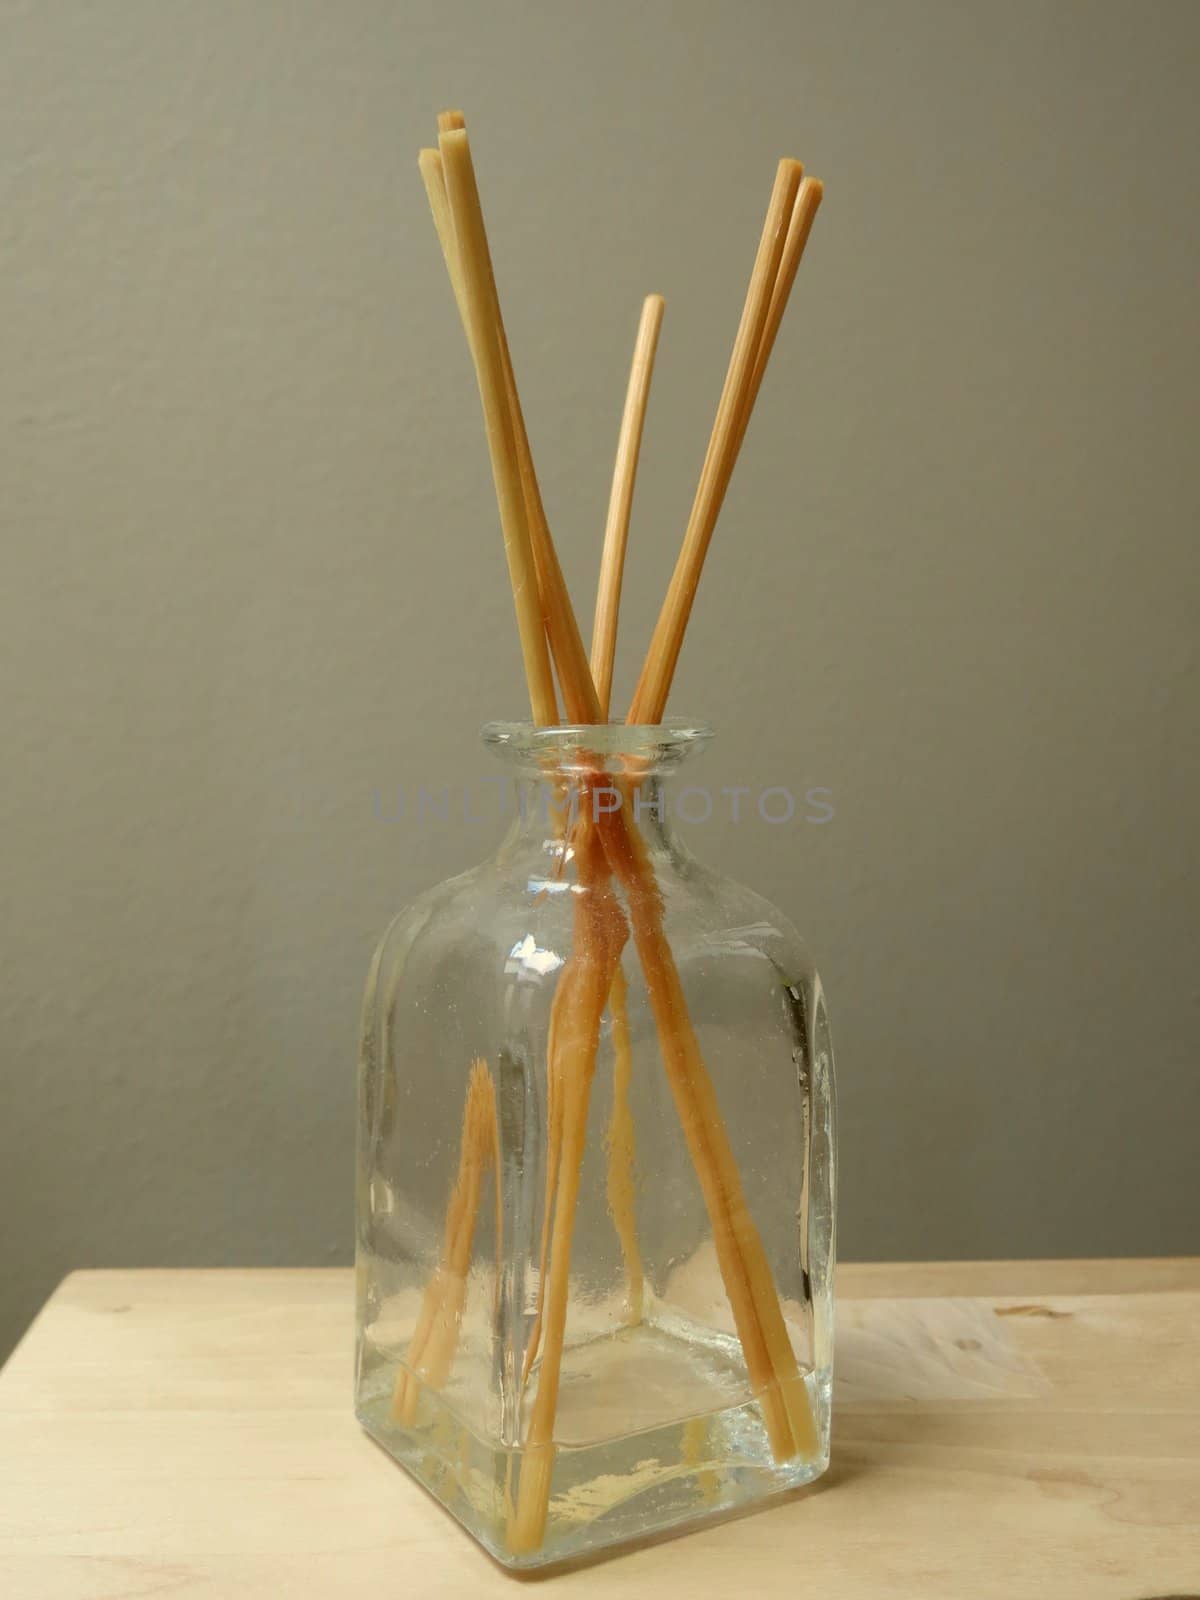 fragrance diffuser by paolo77